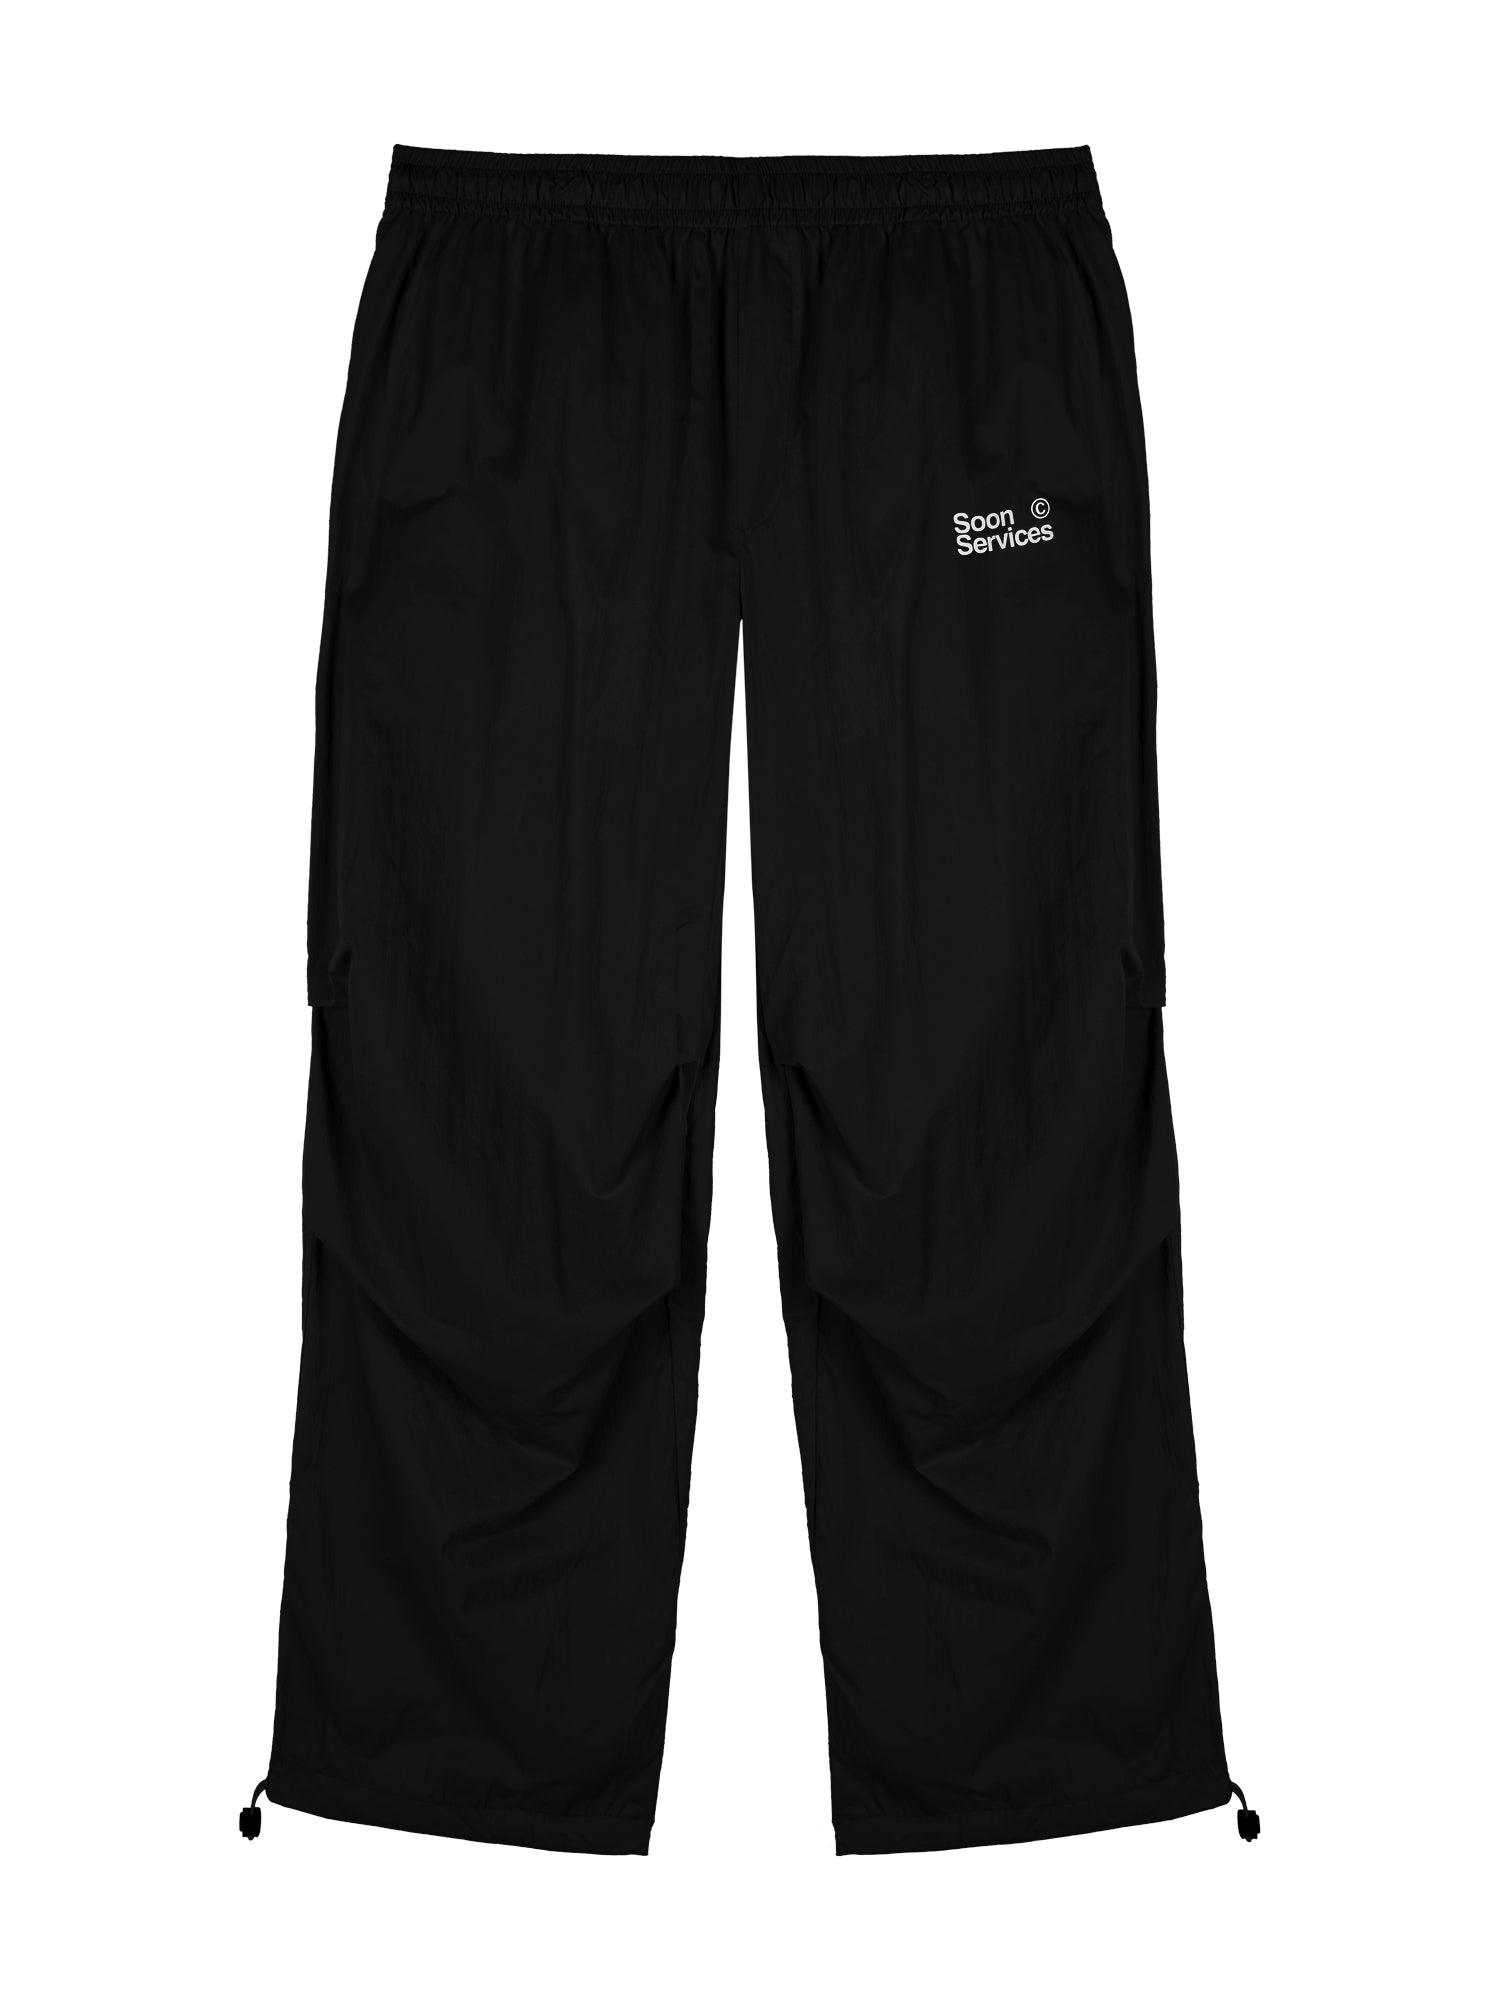 Soon Services Track Pants